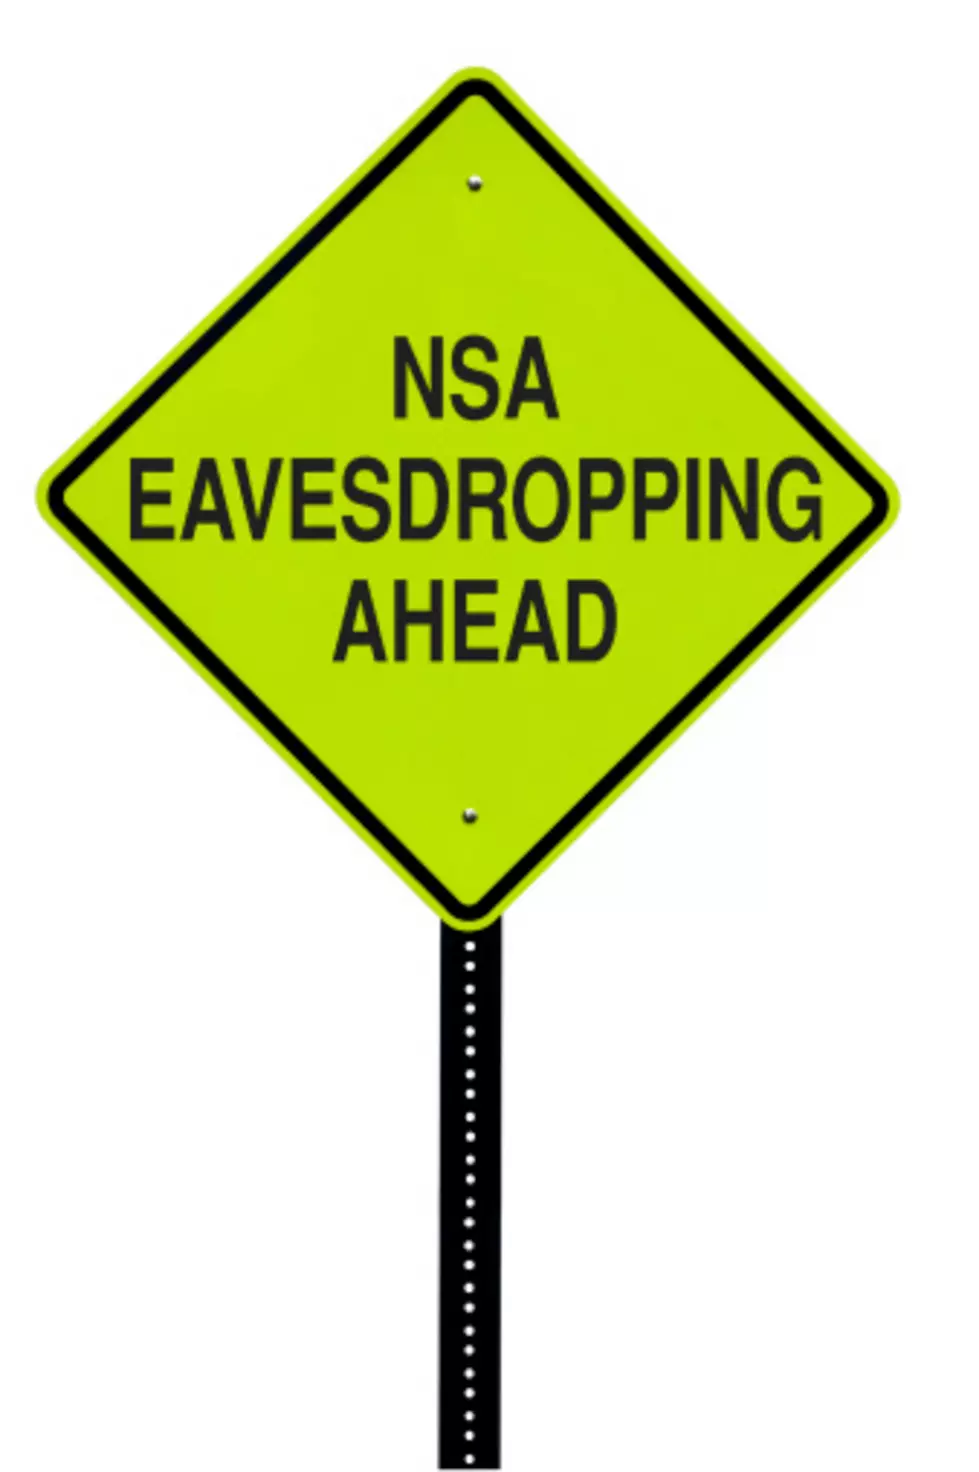 Review Board Calls For Limits On NSA Surveillance